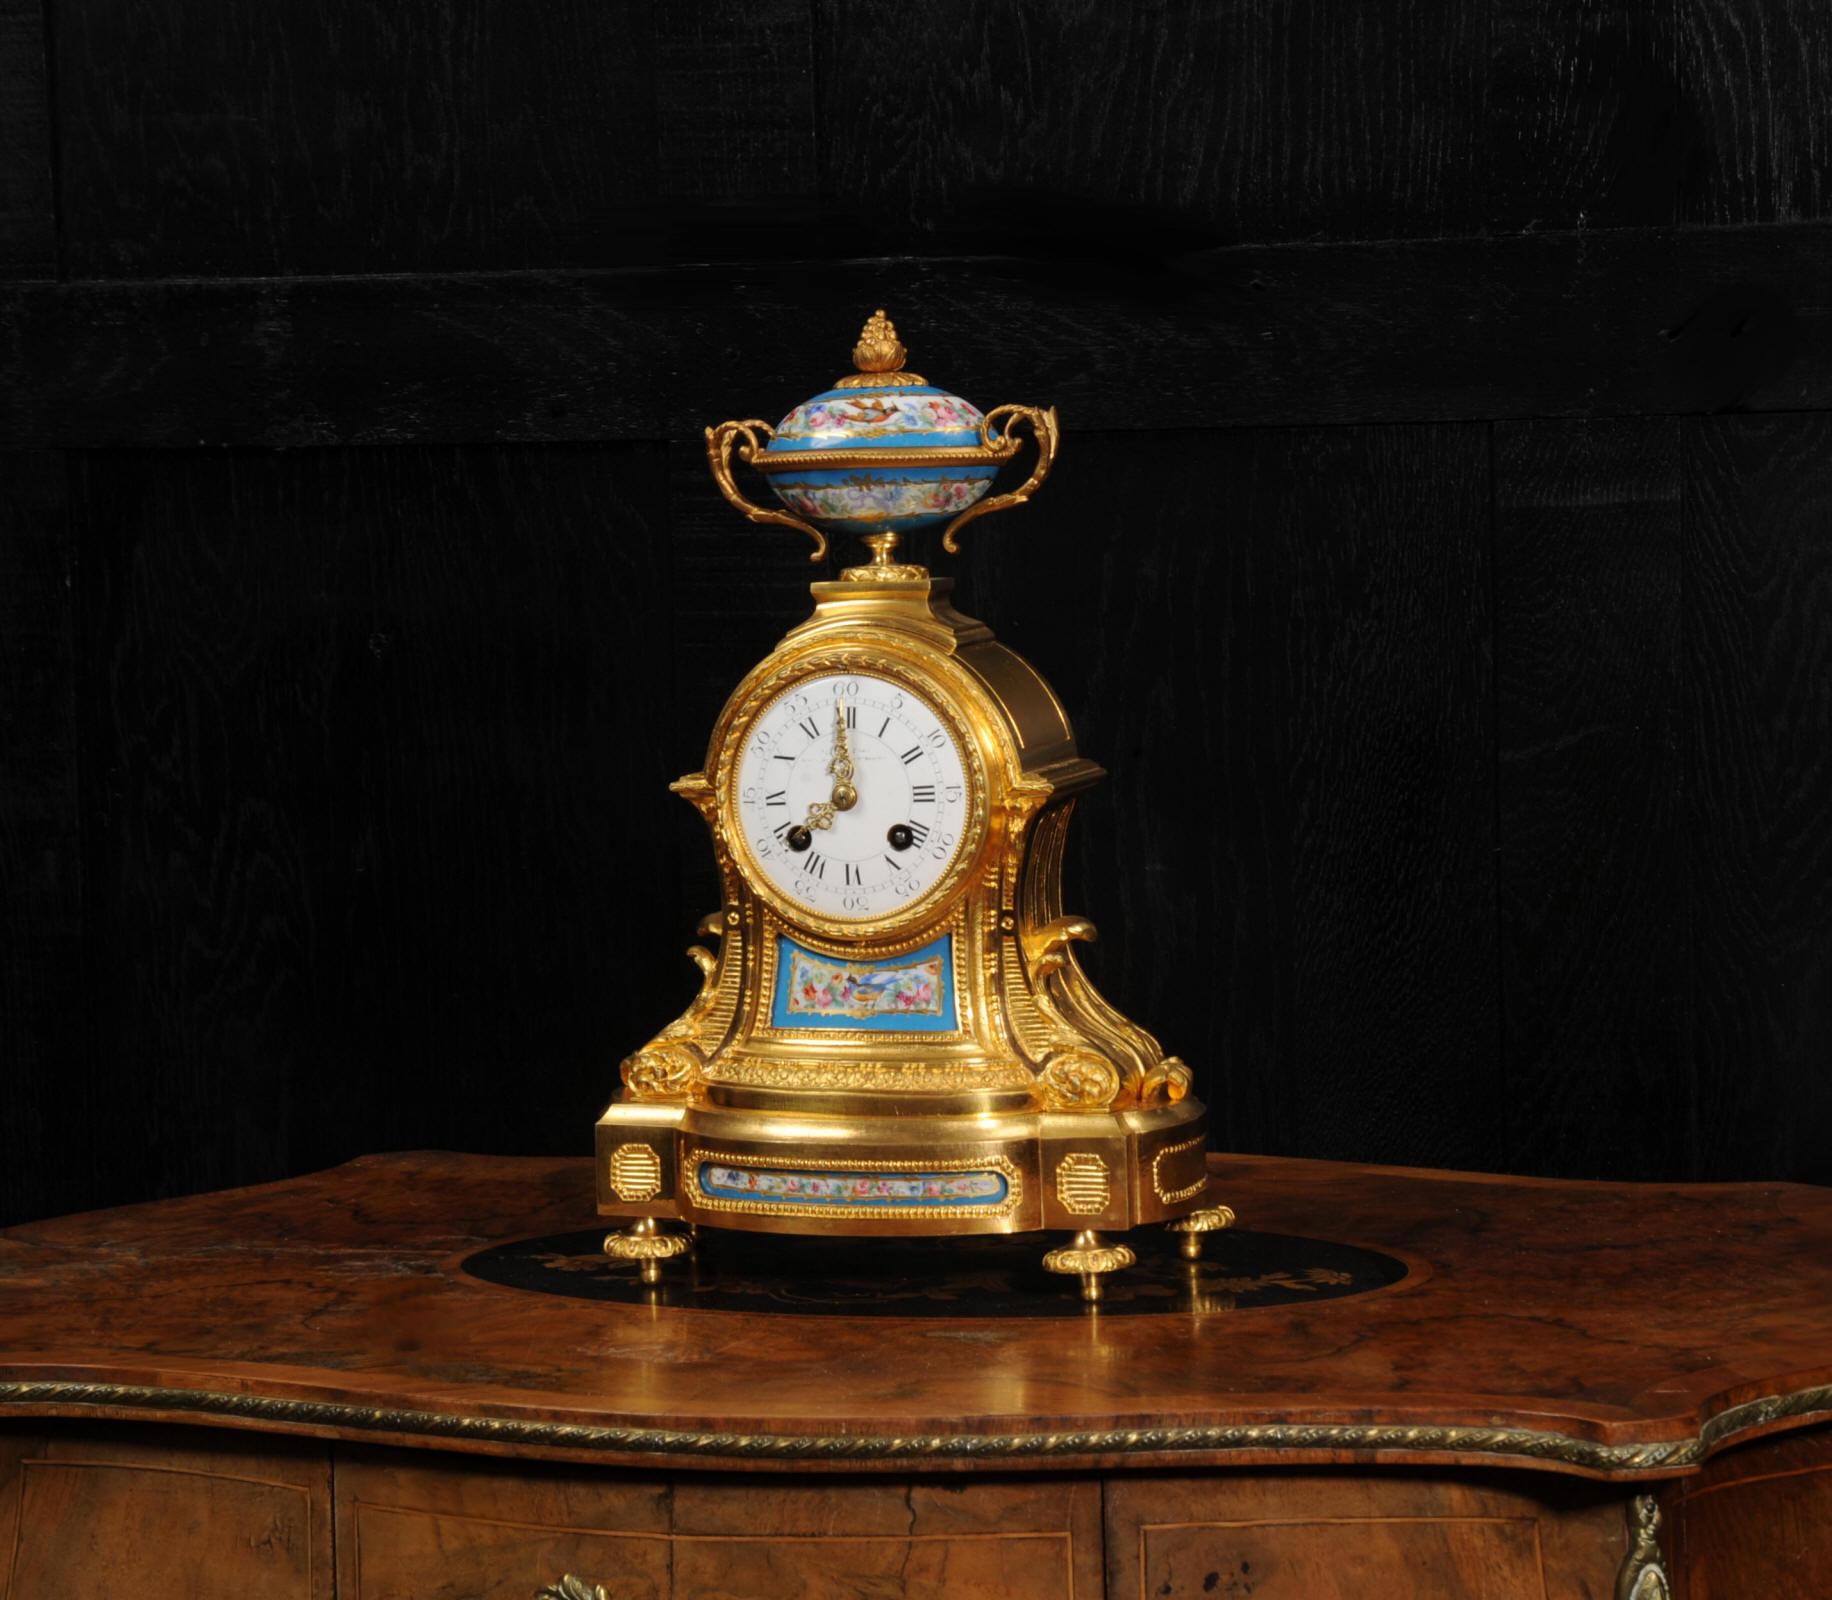 A superb early antique French ormolu and Sèvres style porcelain clock. It is made of exquisite ormolu (finely gilded bronze) mounted with very finely painted Sèvres style porcelain, exotic birds and flowers, with a blue ground. It is by the Parisian